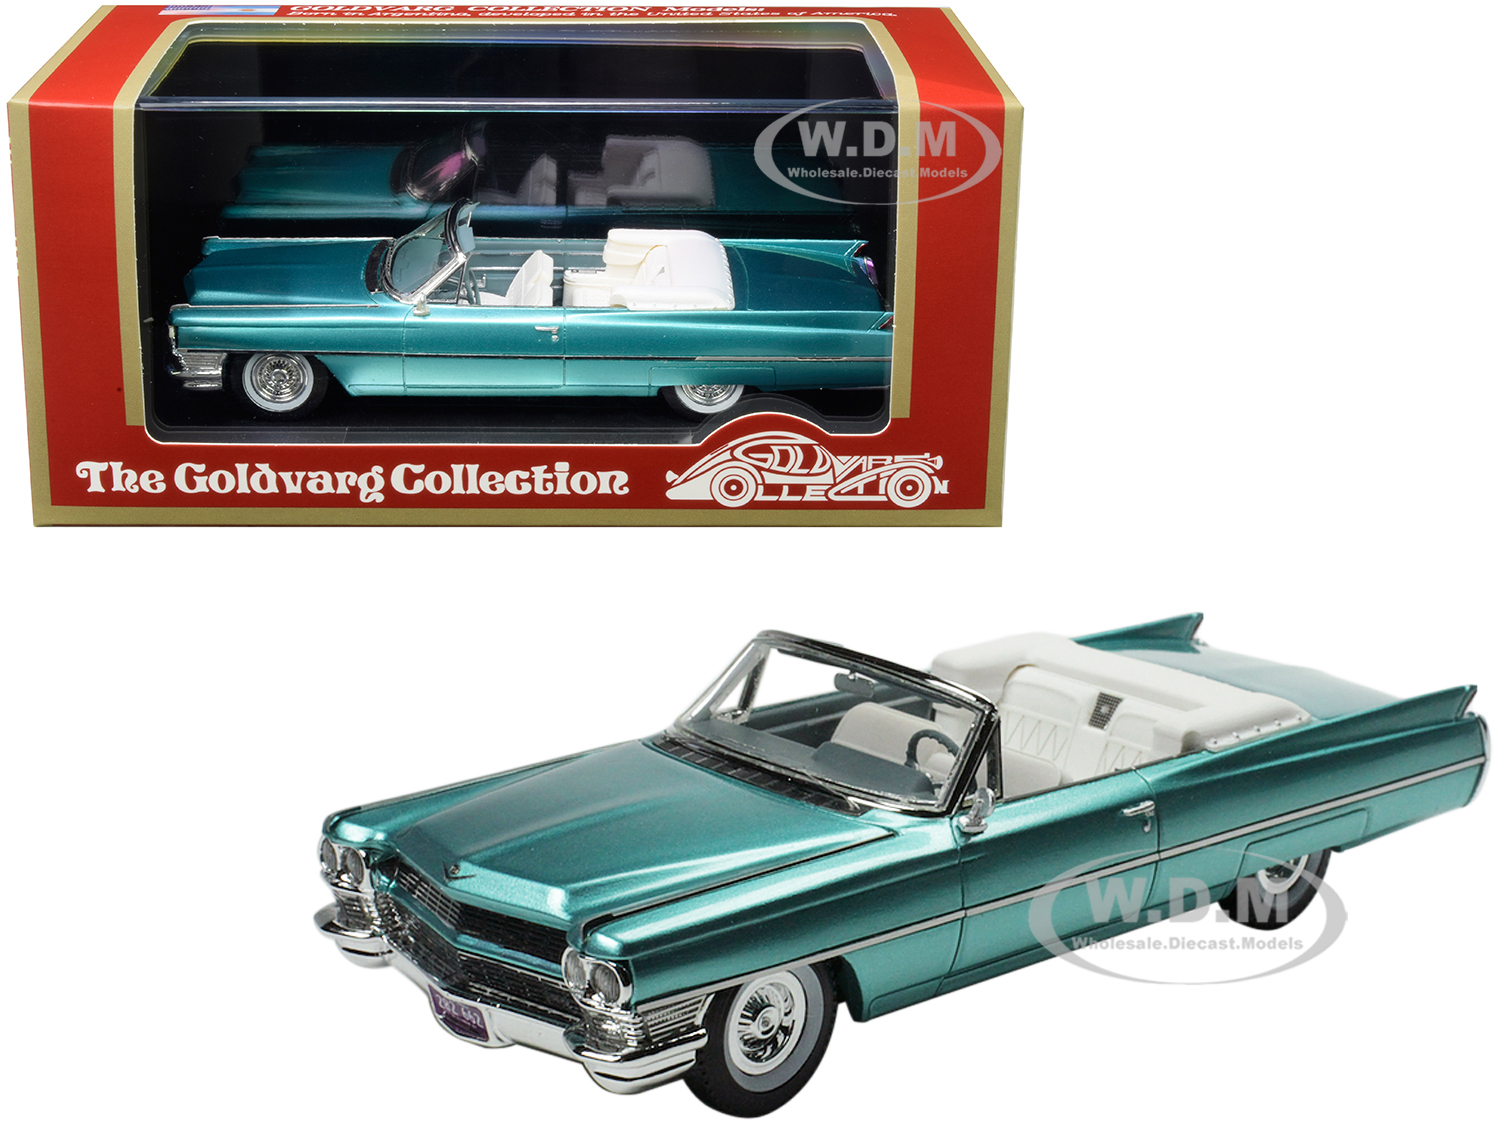 1964 Cadillac Deville Convertible Firemist (metallic) Aquamarine Limited Edition To 210 Pieces Worldwide 1/43 Model Car By Goldvarg Collection